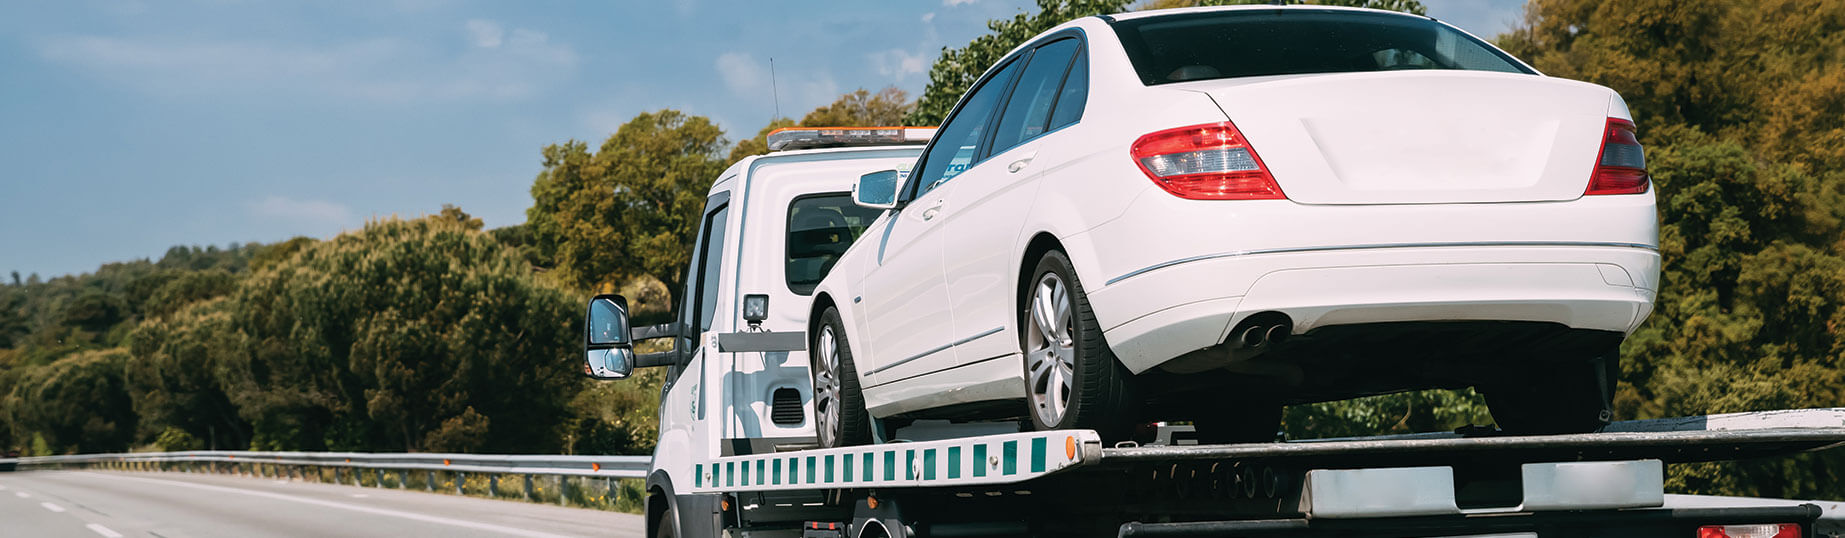 Nanuet 24 Hour Towing, Emergency Roadside Assistance and Towing Company